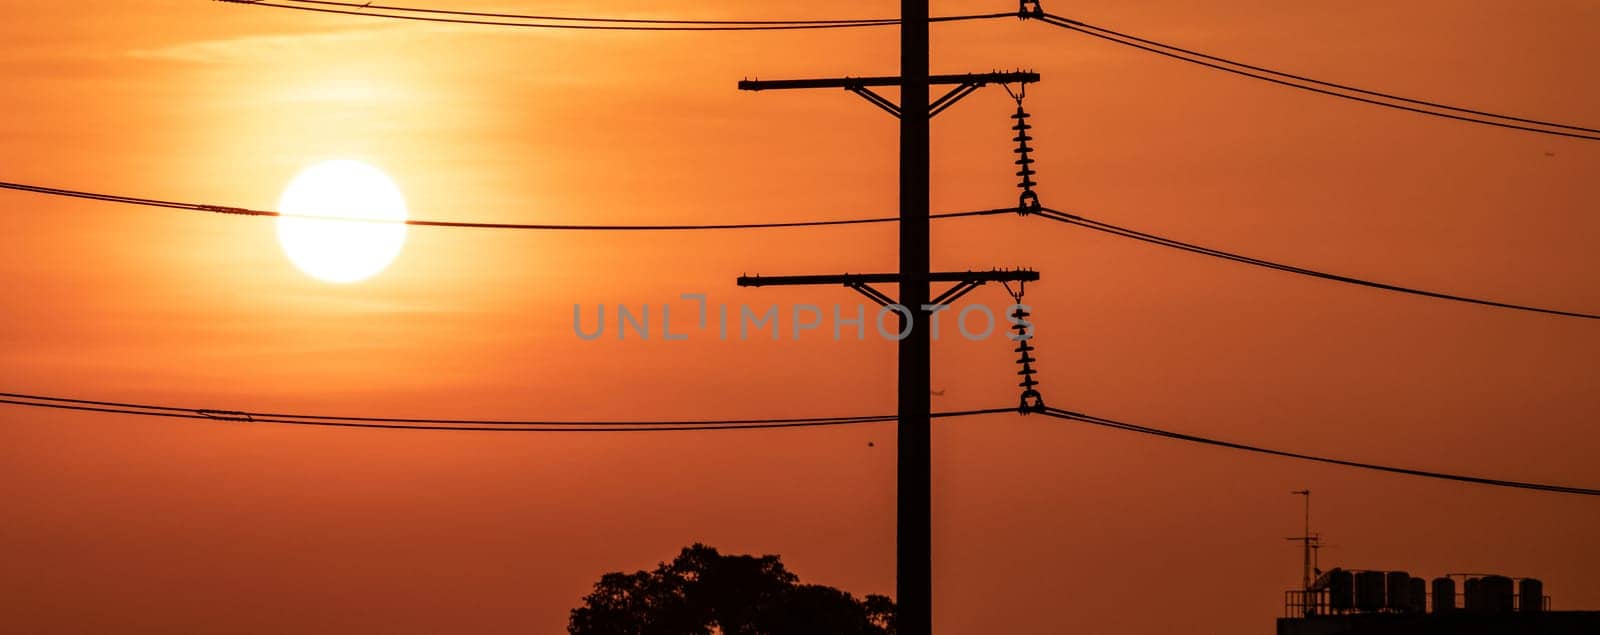 High voltage electric transmission pylon. High voltage power lines against sunset sky. Electricity pylon and electric power transmission lines. High Voltage pole provide power supply. Energy crisis.